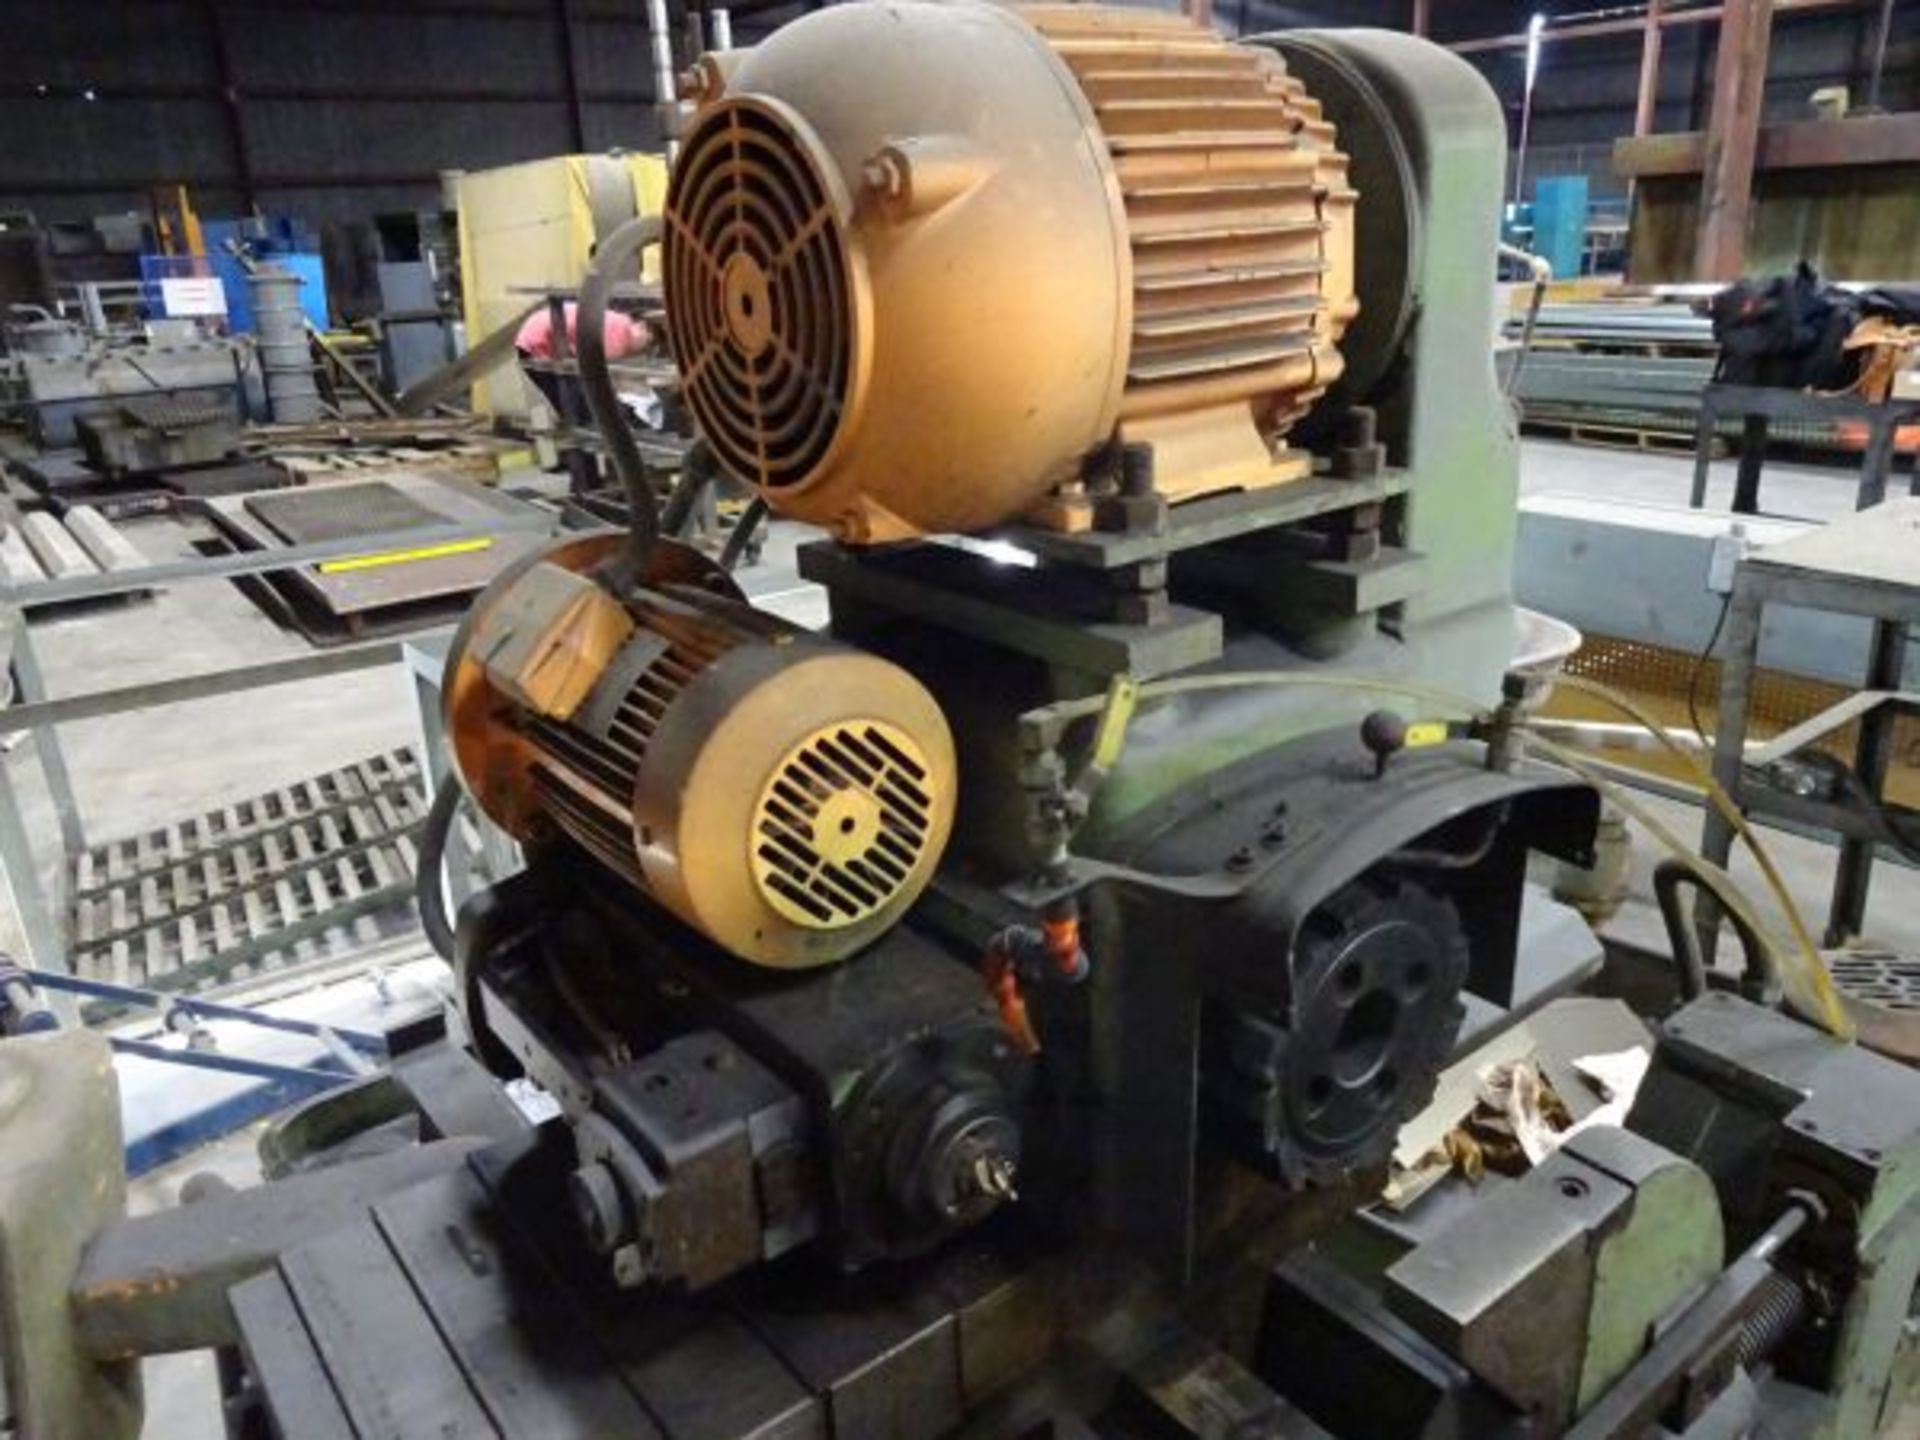 6" X 60" Giddings & Lewis Model DM Endomatic Double End Facing and Centering Machine; S/N FM-1112, - Image 5 of 14